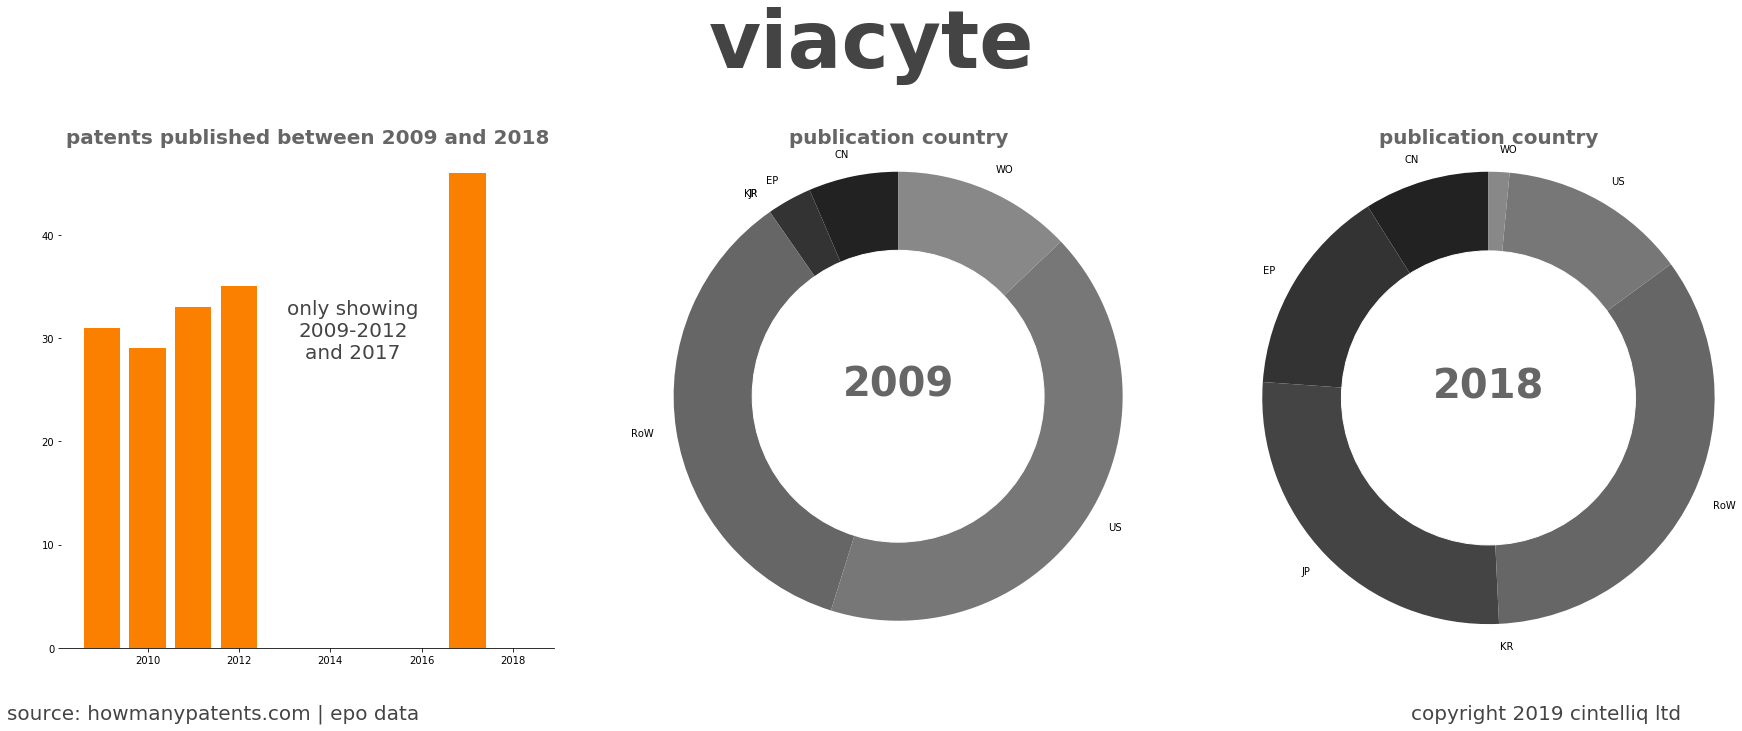 summary of patents for Viacyte